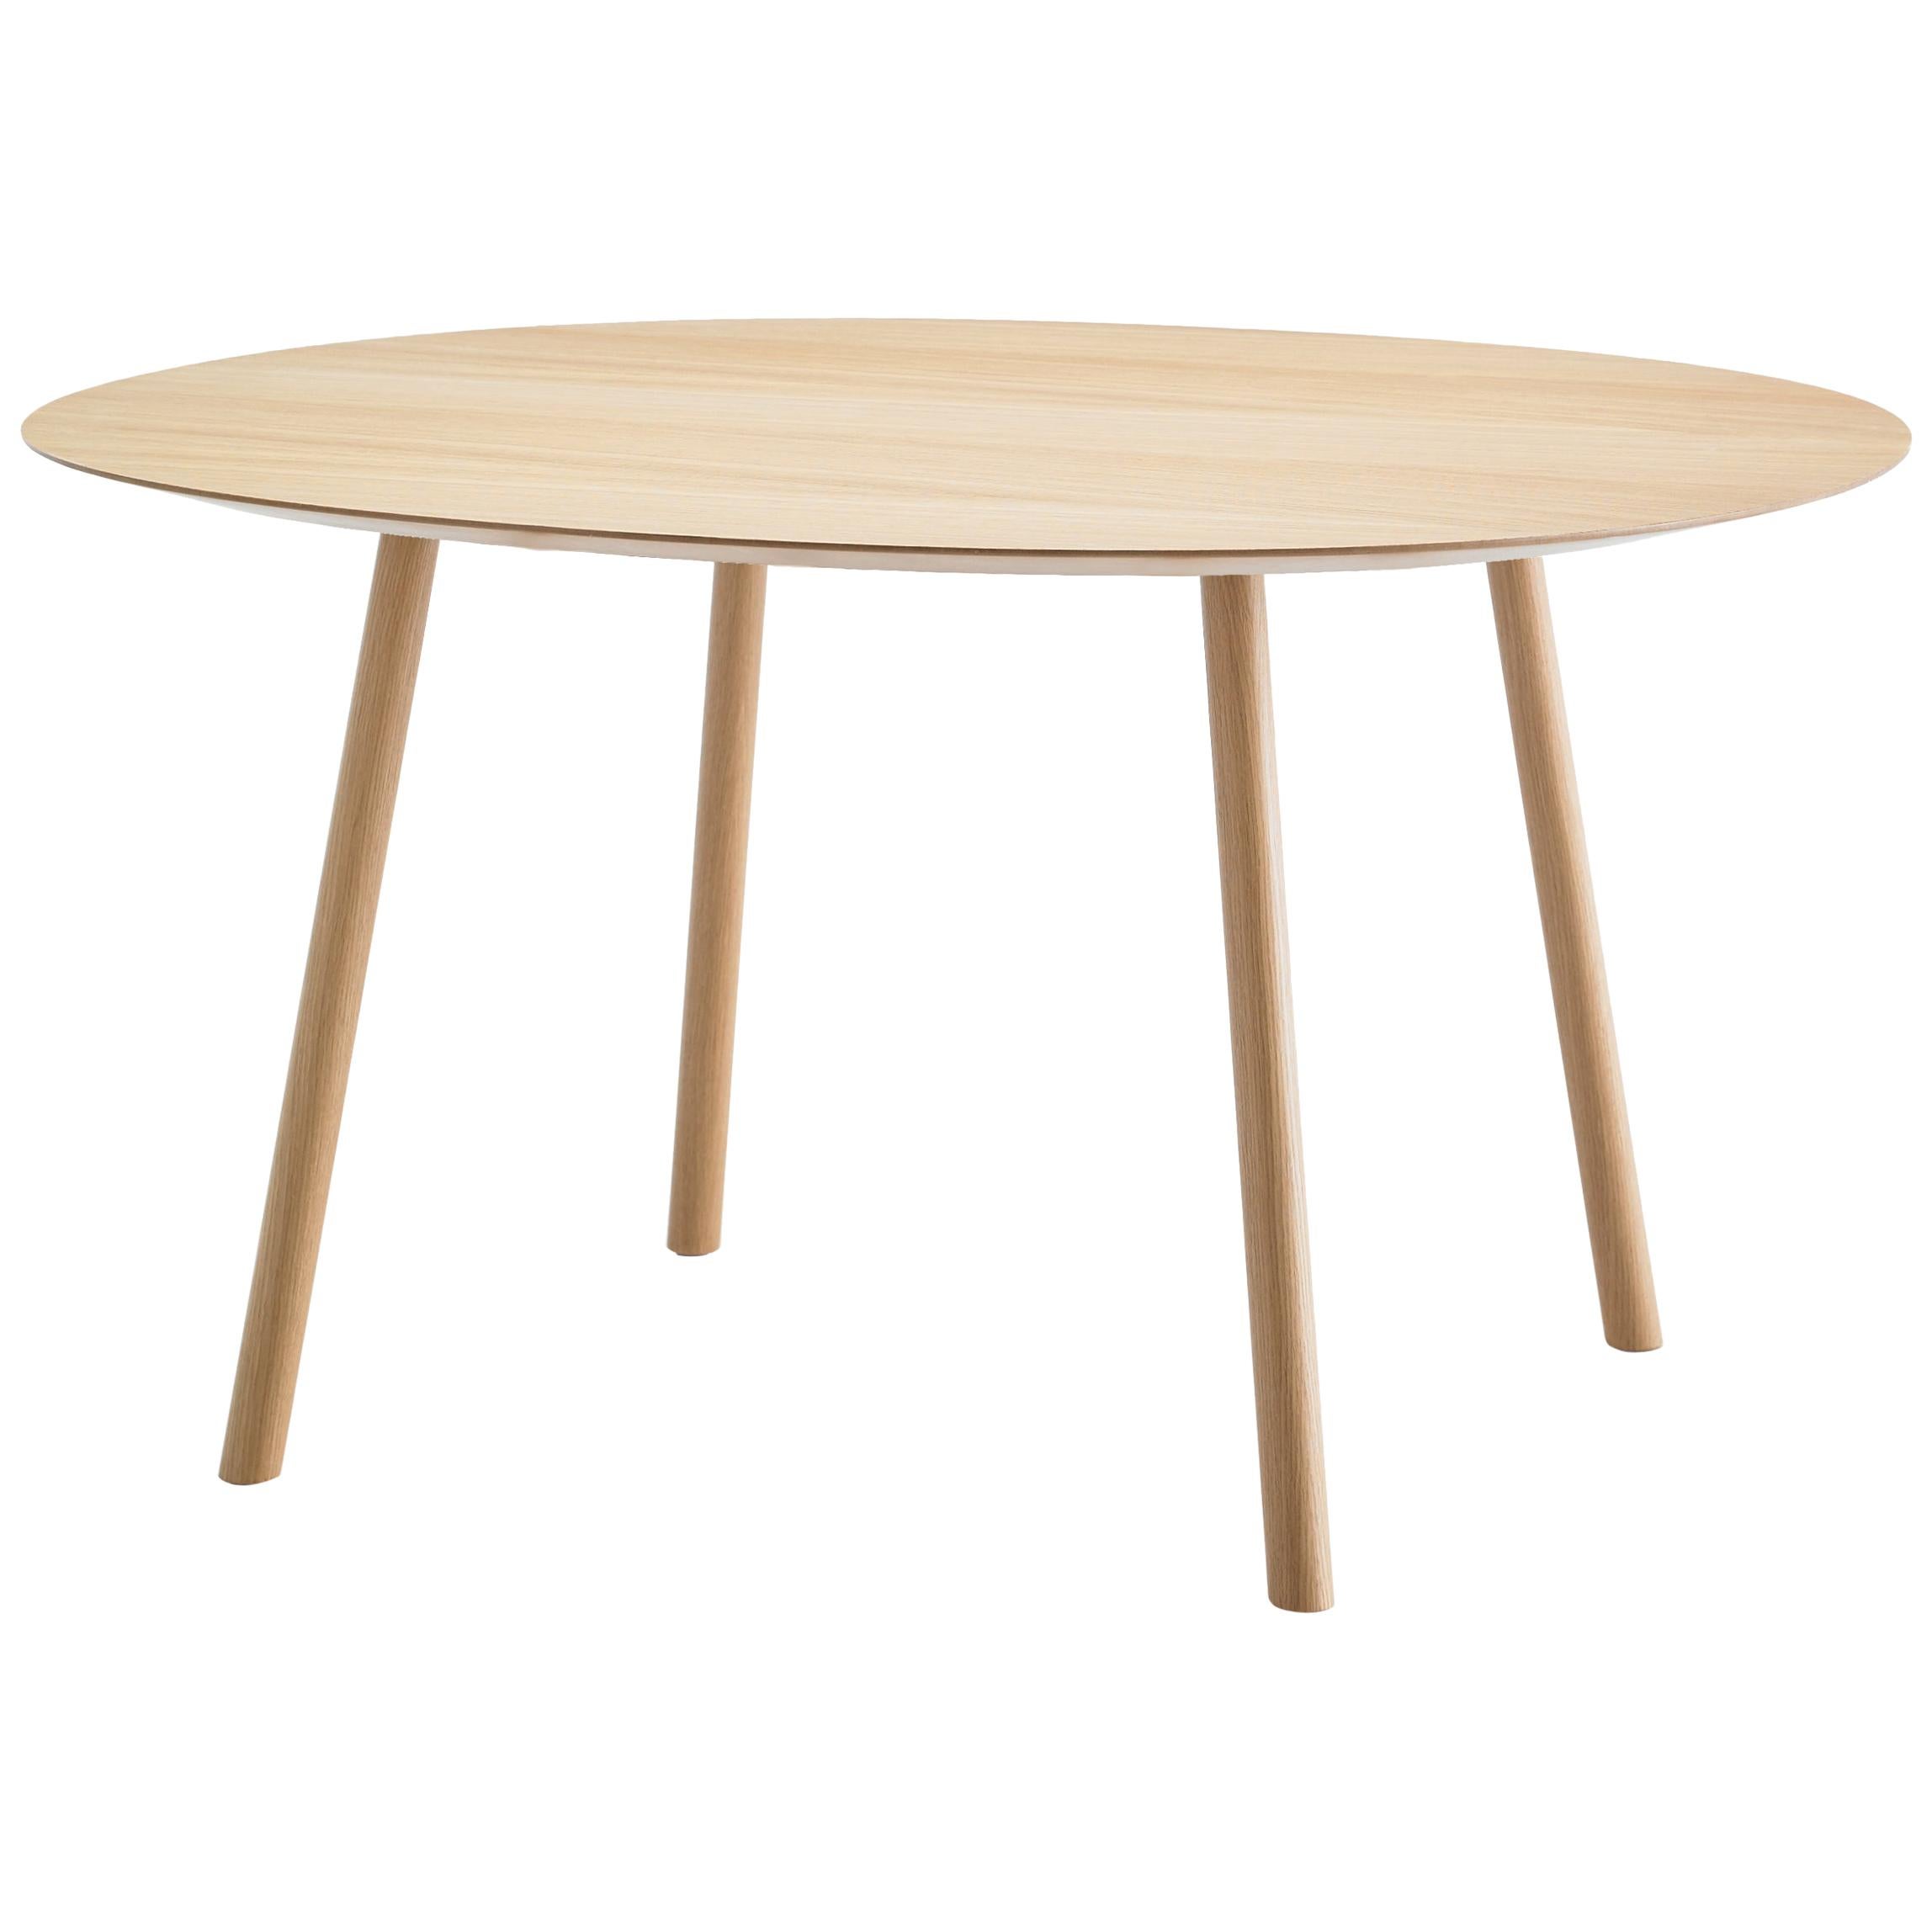 Viccarbe Maarten Table For Sale